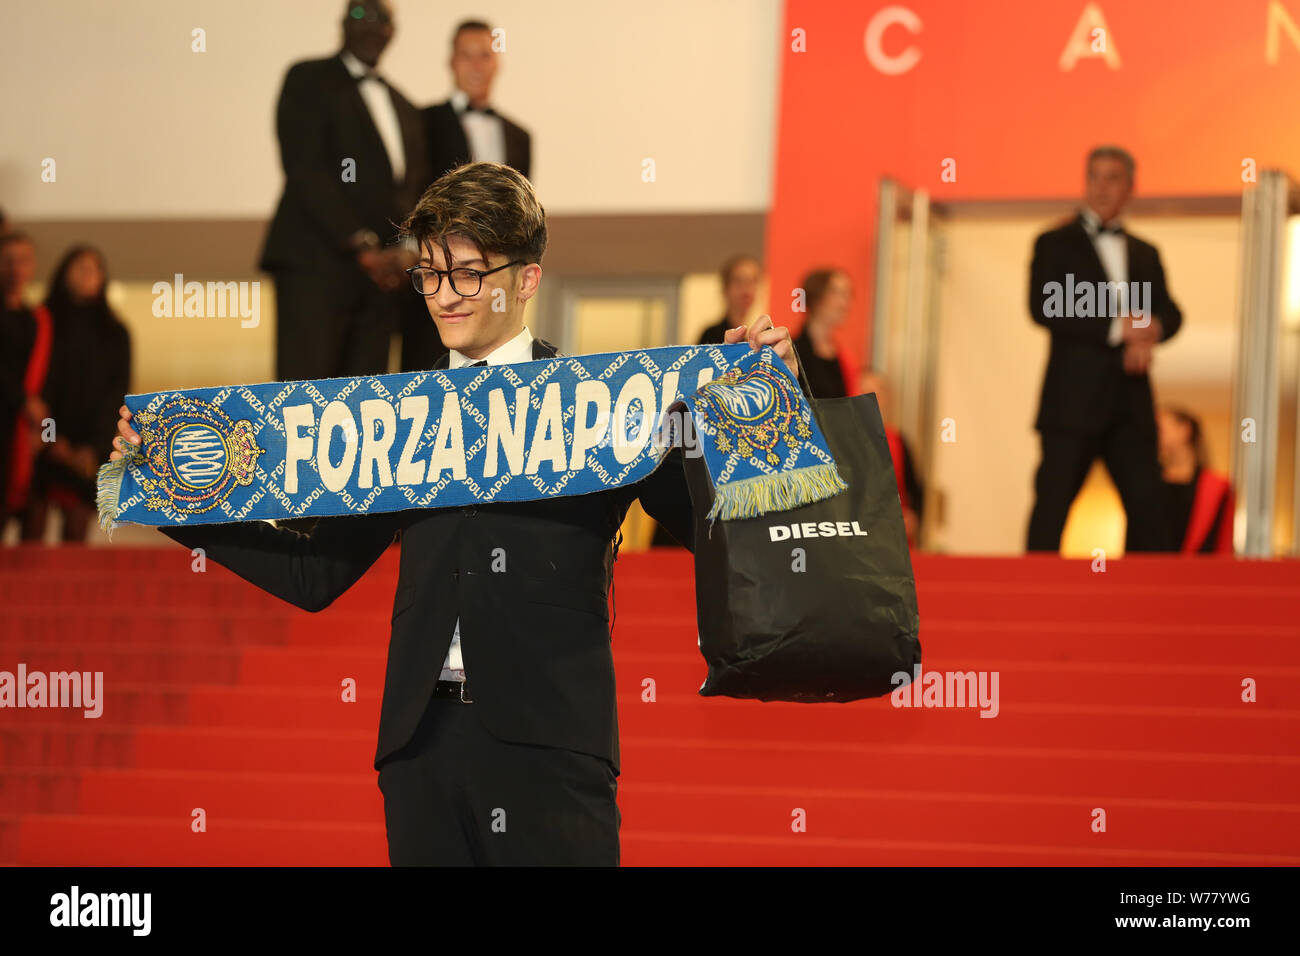 CANNES, FRANCE - MAY 19: a guest attends the Diego Maradona screening during the 72nd Cannes Film Festival (Mickael Chavet) Stock Photo